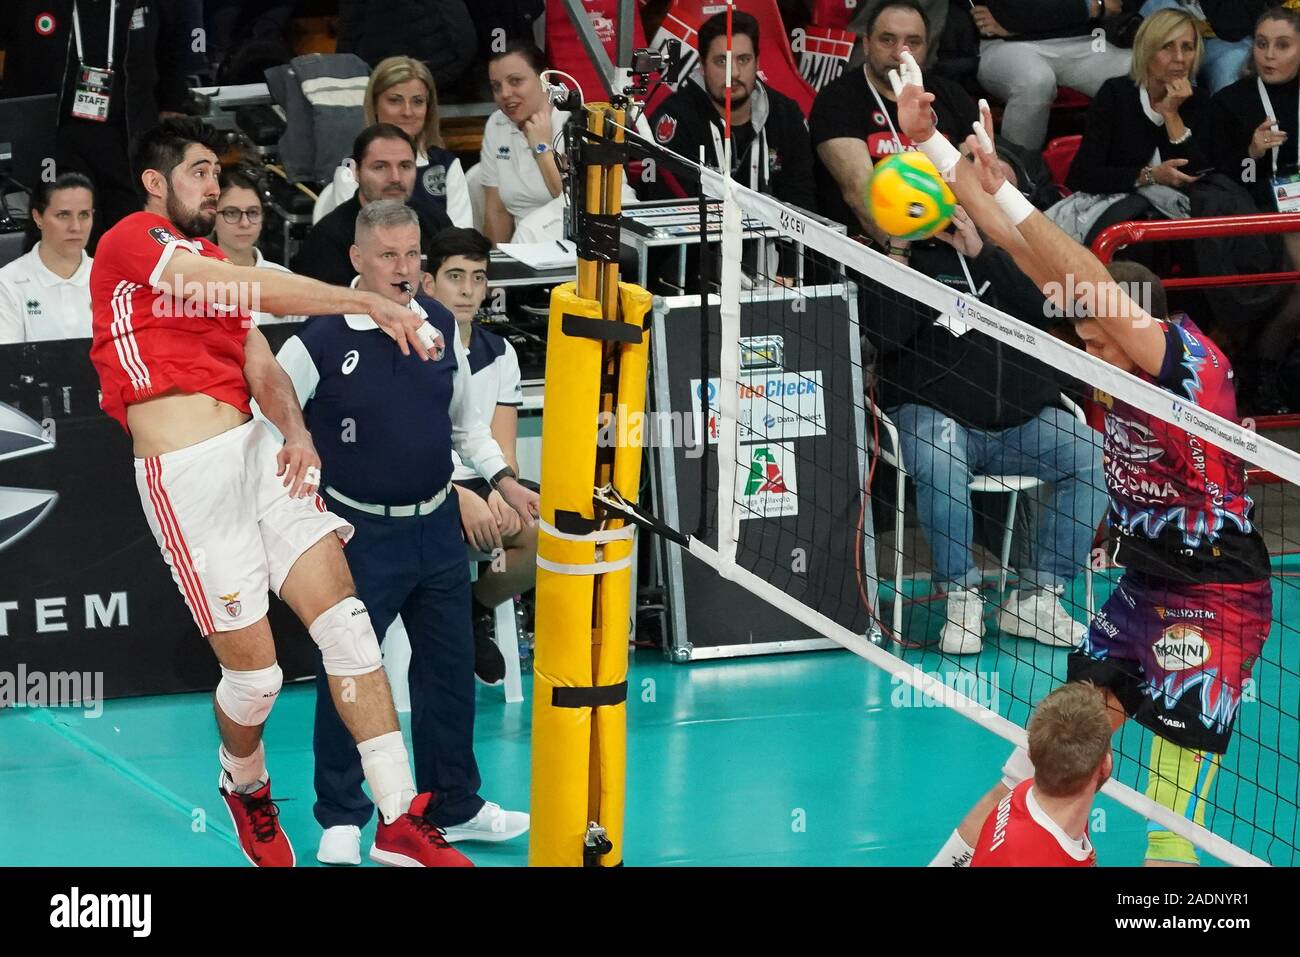 aleixo andre' ryuma oto (n18 benfica lisboa) spike during Sir Sicoma Monini Perugia vs Benfica Lisbona , Volleybal Champions League Men Championship in Perugia, Italy, December 04 2019 Stock Photo